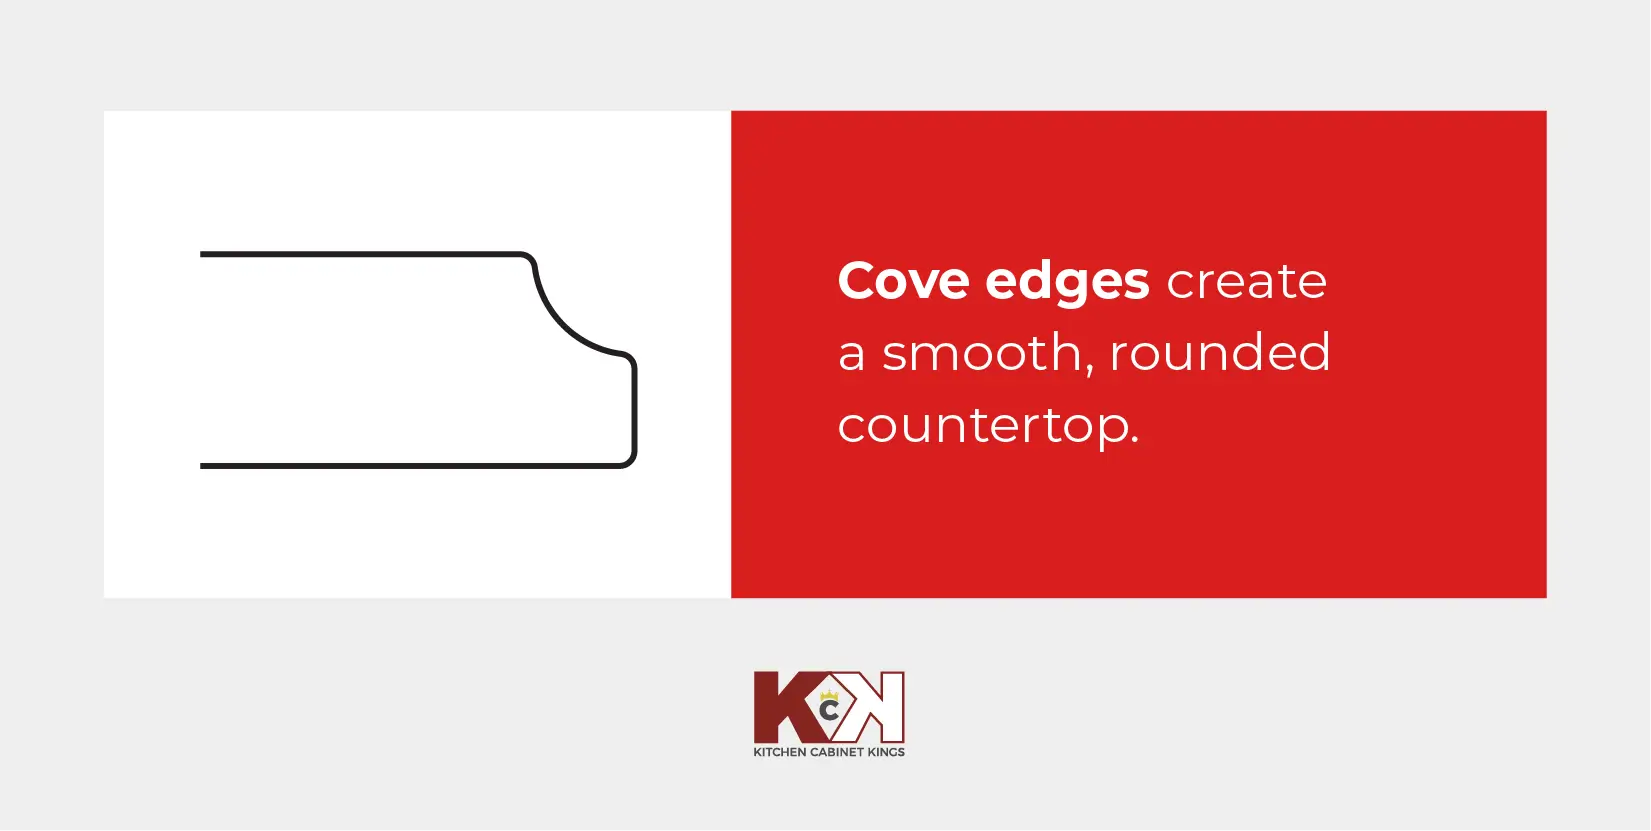 Illustration of cove edges in kitchen.